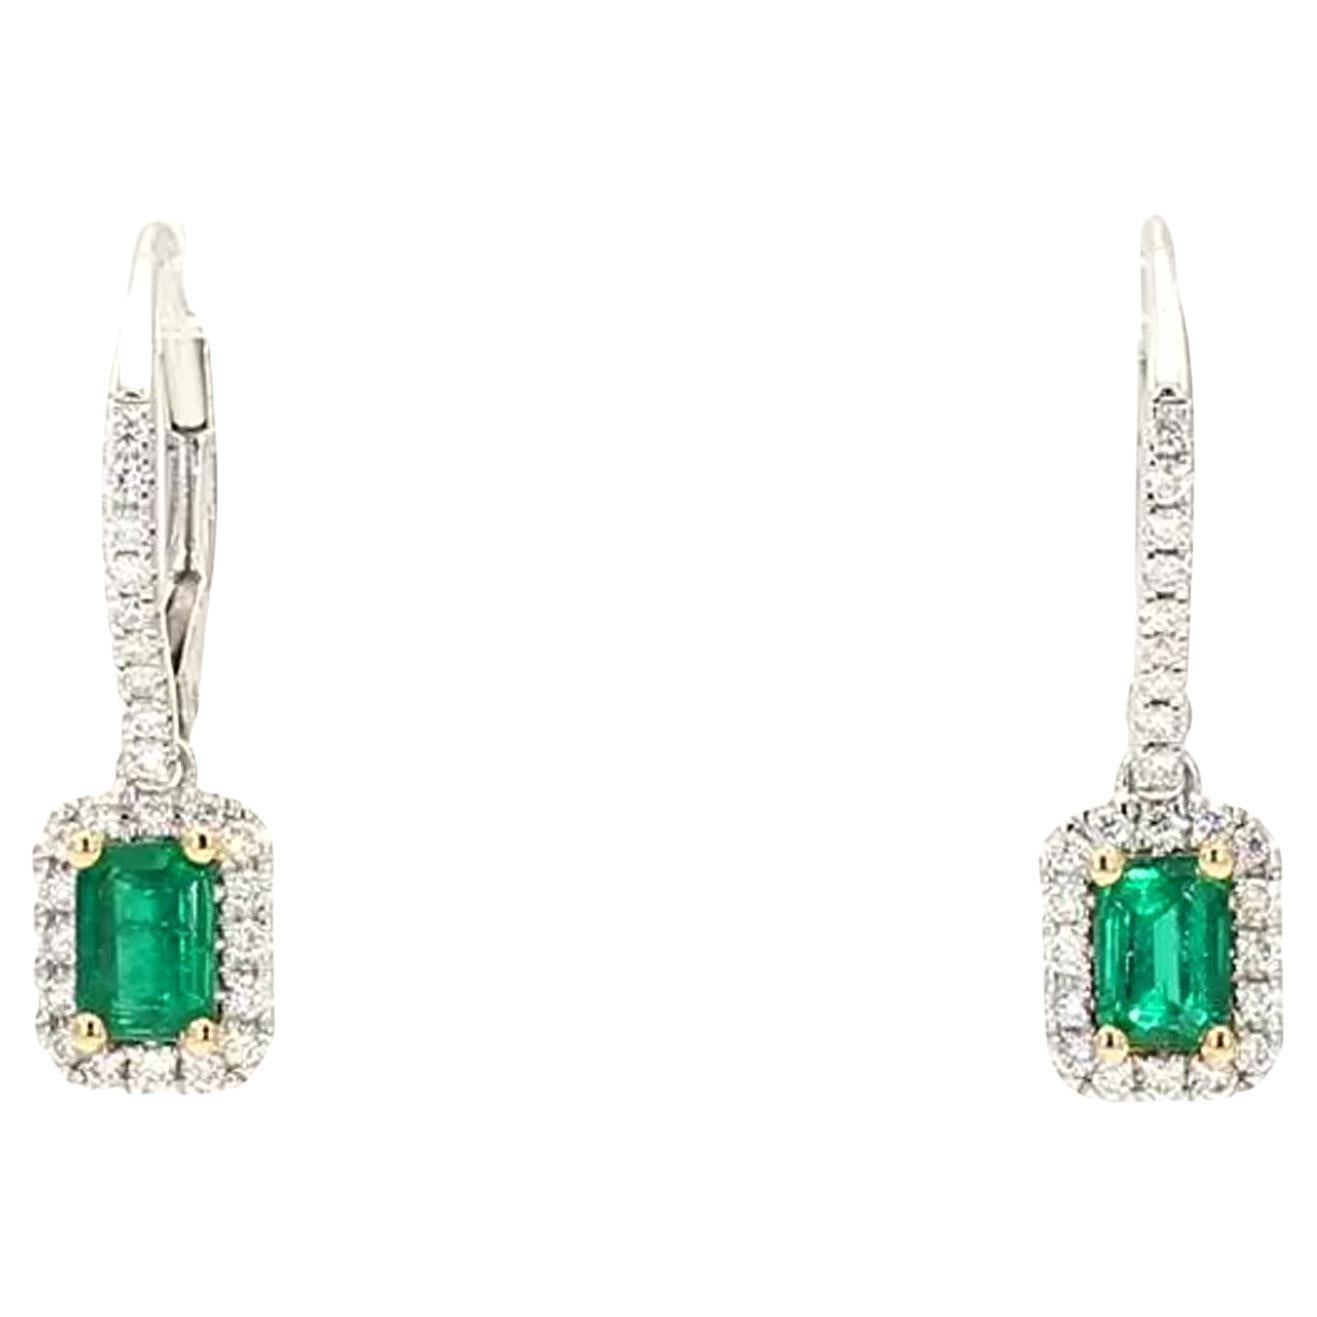 Natural Emerald Cut Emerald and White Diamond .83 Carat TW Gold Drop Earrings